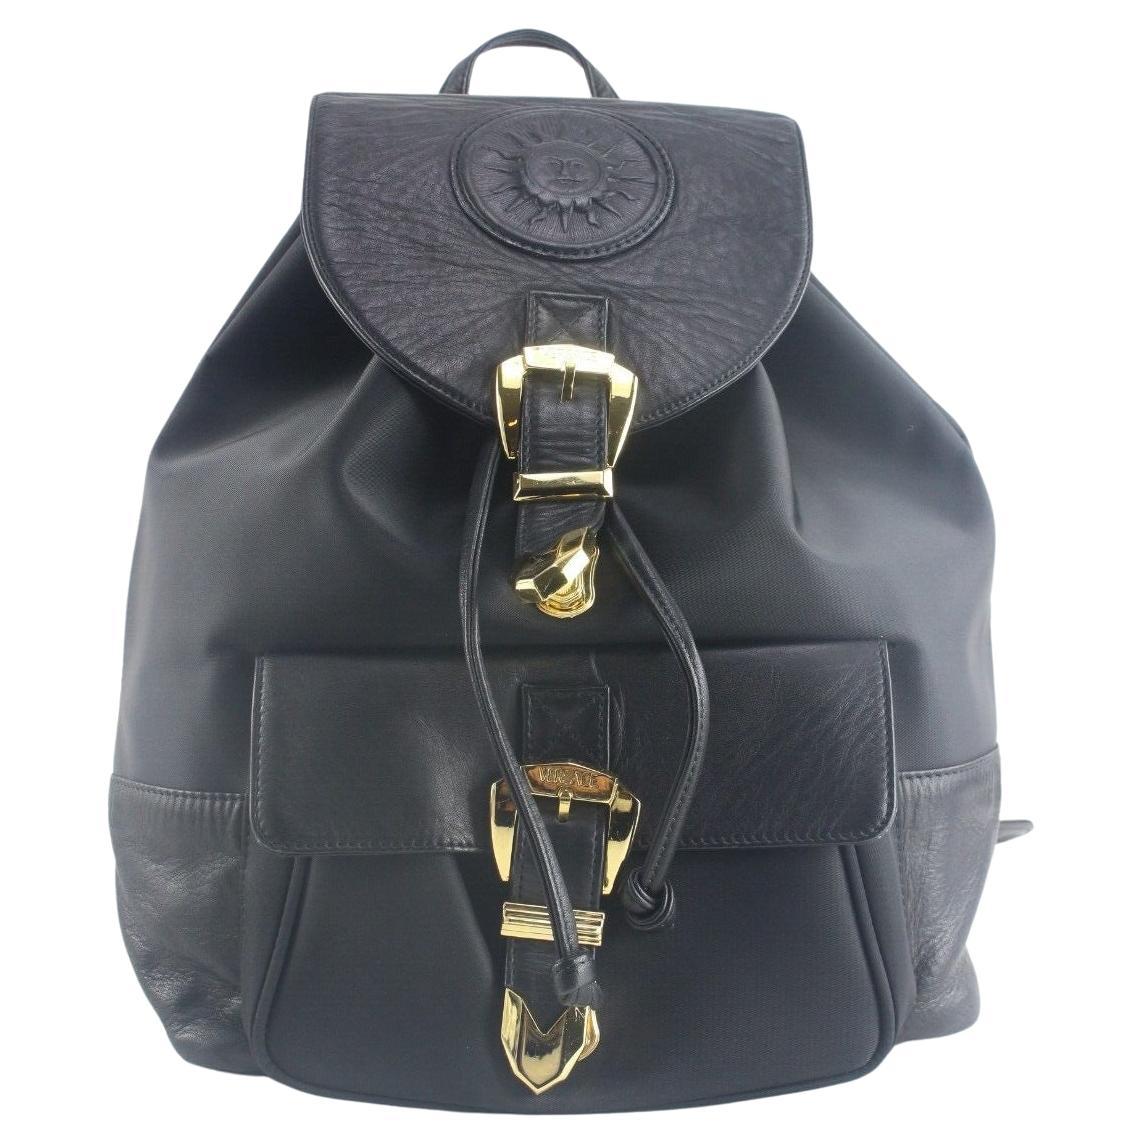 Gianni Versace Leather Backpack 2GV918K For Sale